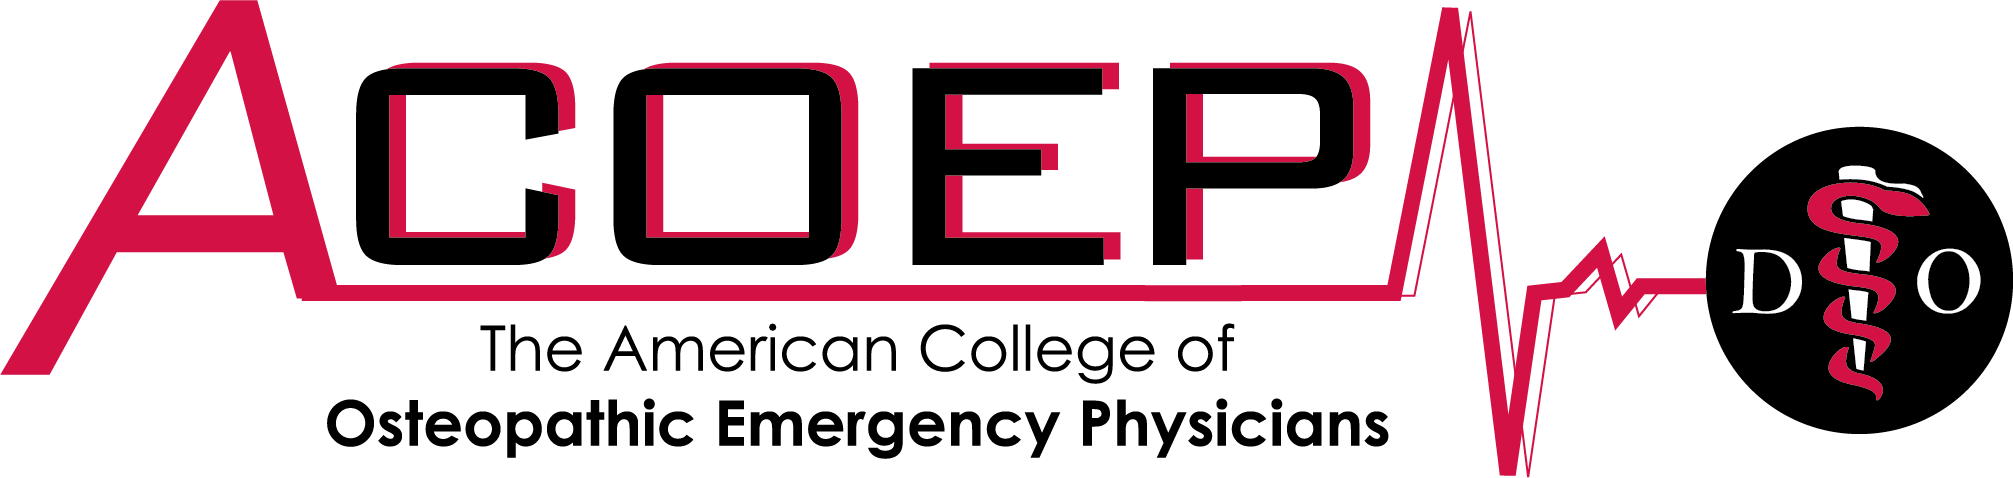 The American College of Osteopathic Emergency Physicians (ACOEP) logo